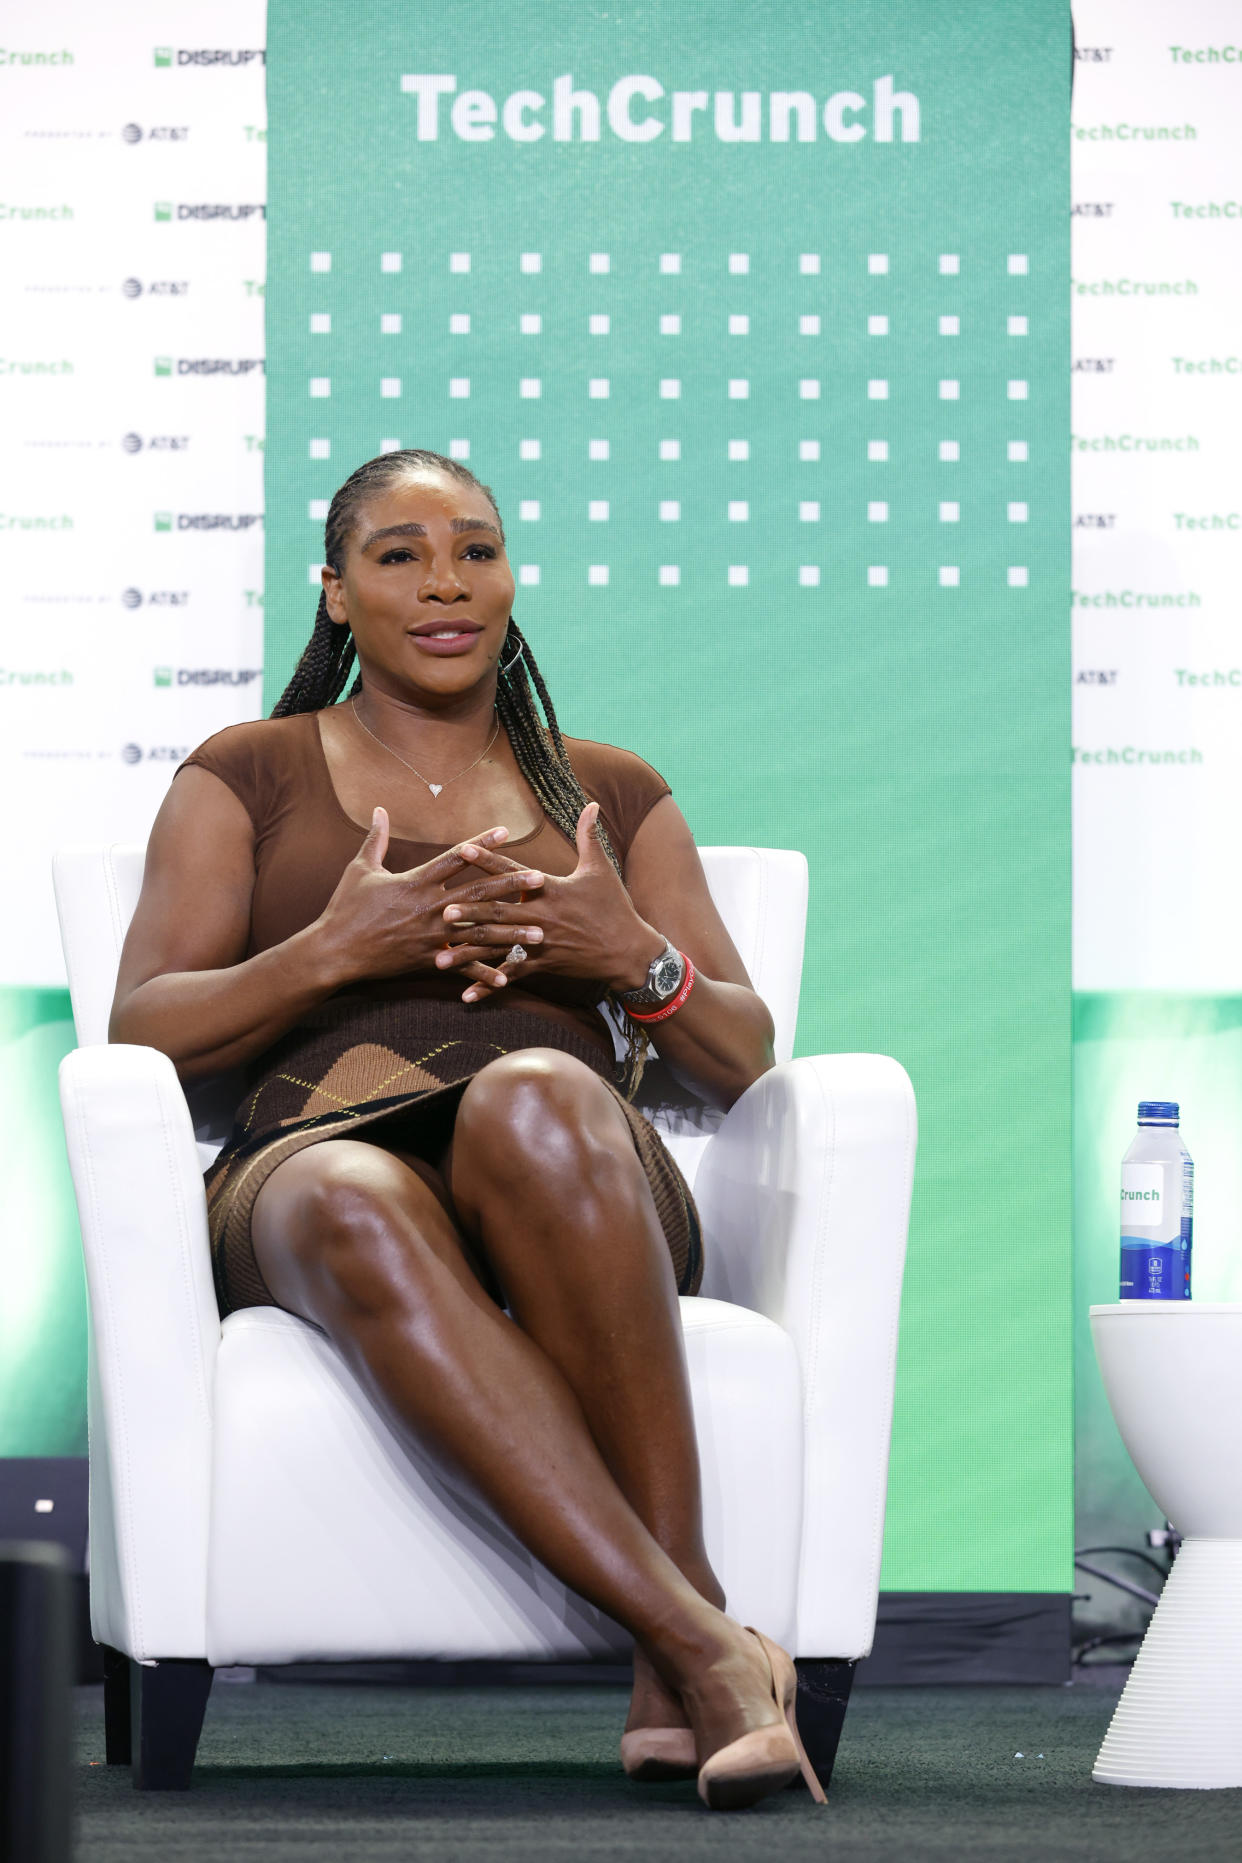 Serena Williams speaks on stage during TechCrunch Disrupt 2022 on October 19, 2022 (Photo by Kimberly White/Getty Images for TechCrunch)